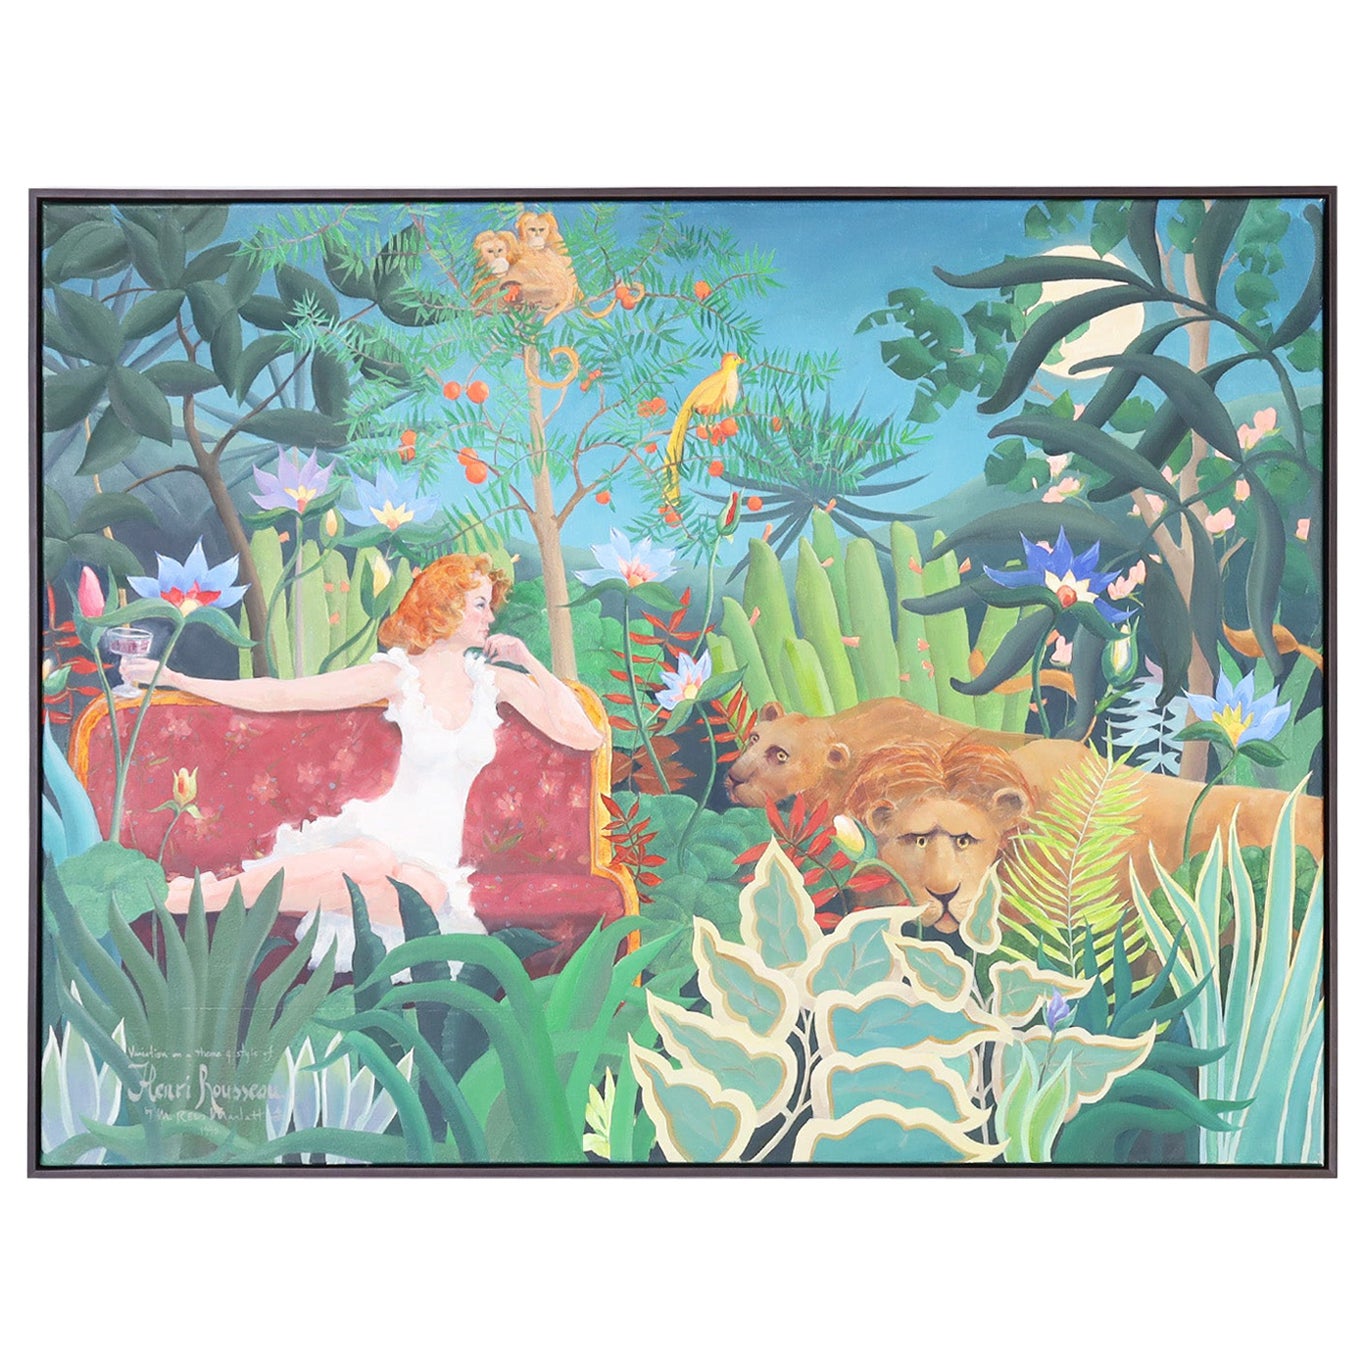 Painting on Canvas of a Jungle with Cats, Monkeys, and a Woman For Sale